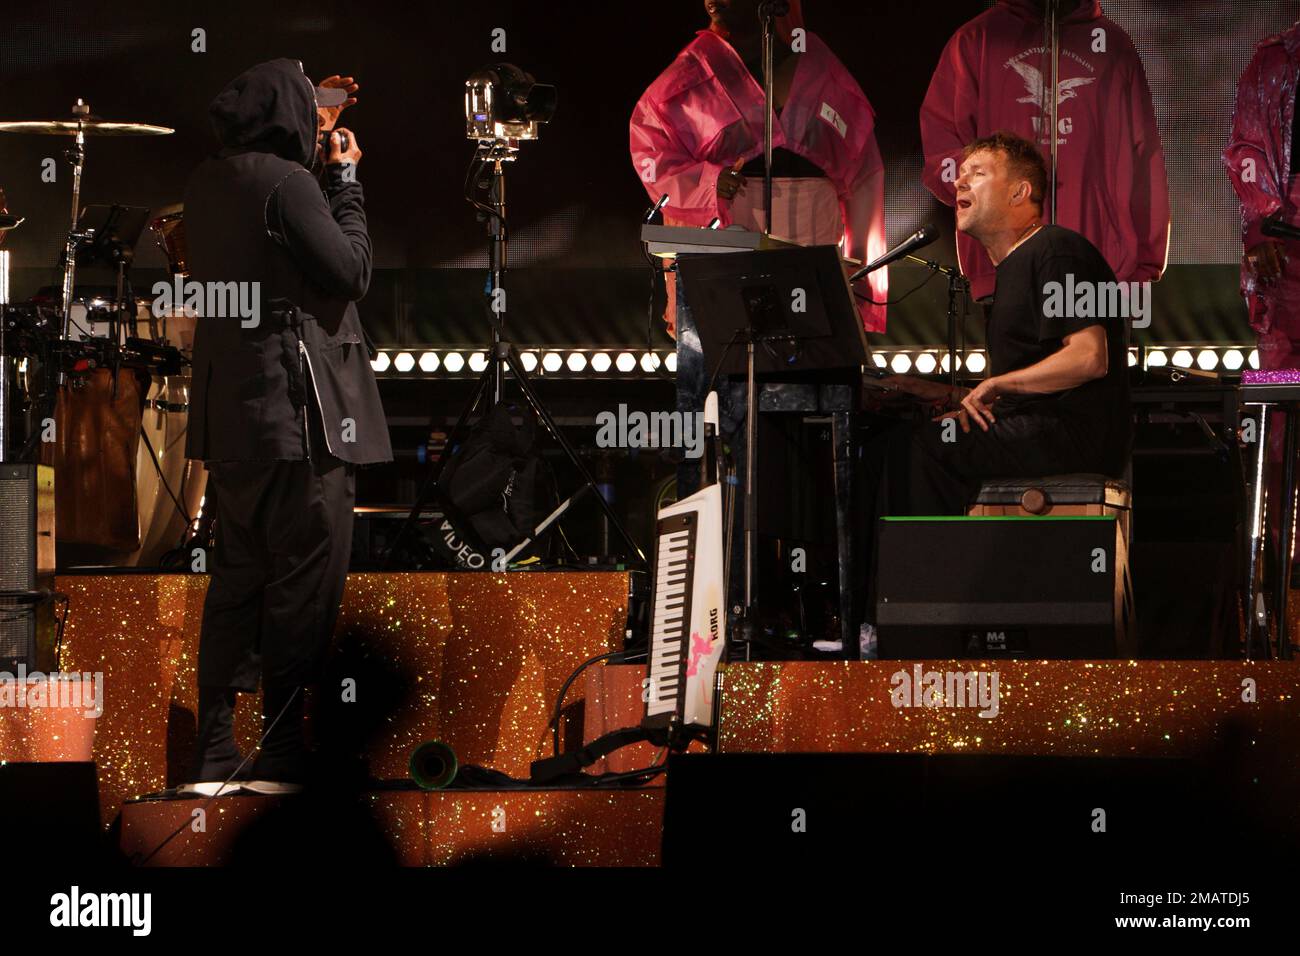 Yasiin Bey and Damon Albarn of Gorillaz perform on stage at All